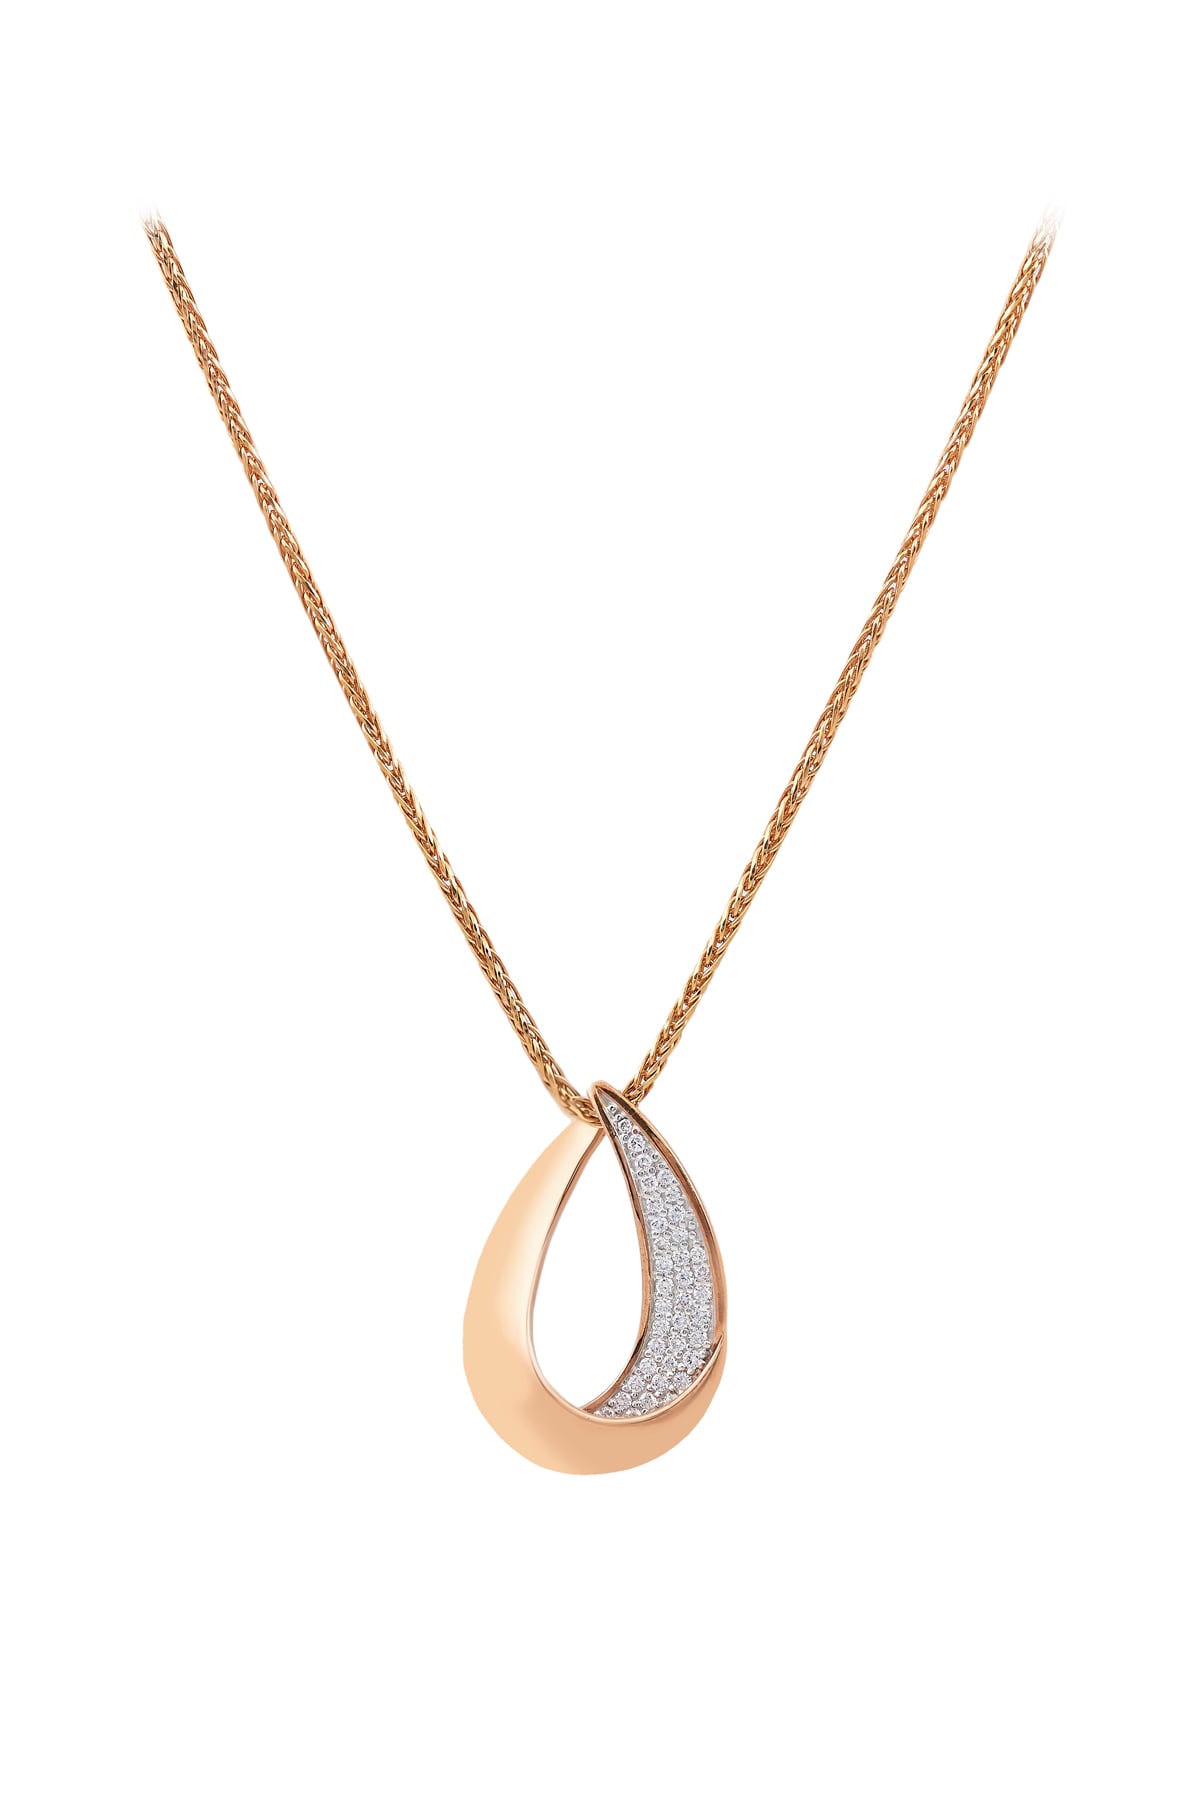 Diamond Oval Pendant In Rose Gold from LeGassick.